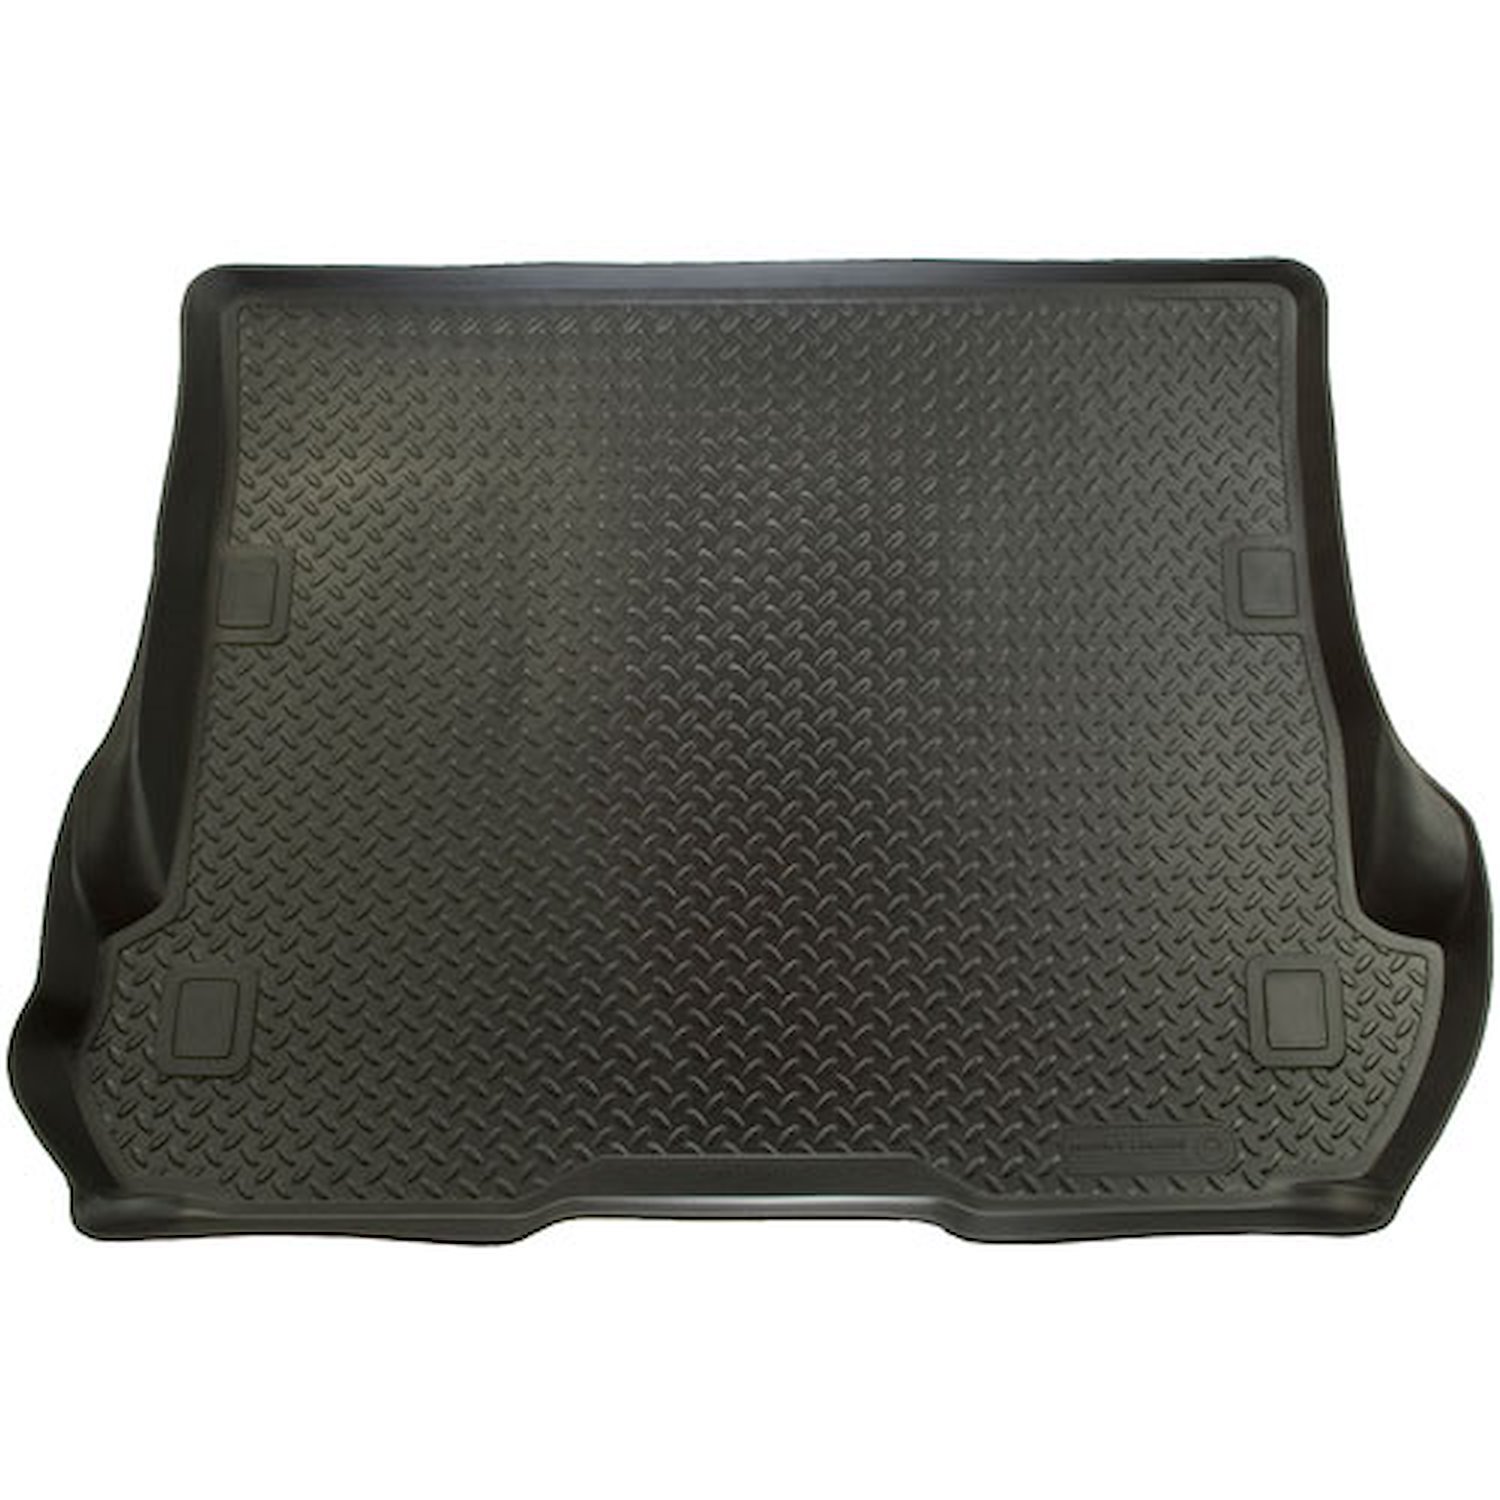 Classic Style Cargo Area Liner 2000-2005 Ford Excursion